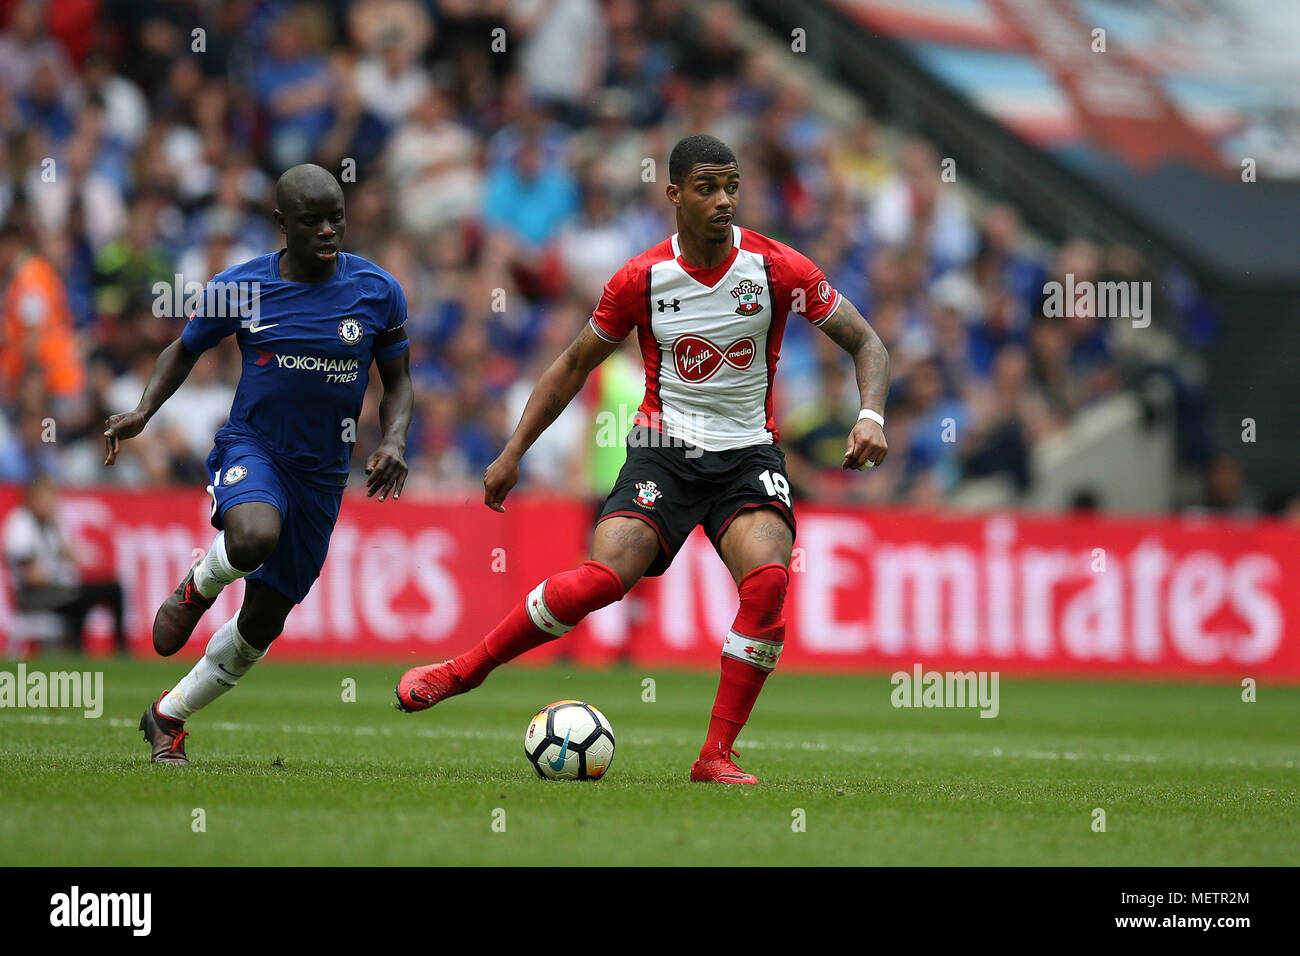 London, UK. 22nd Apr, 2018. Mario Lemina of Southampton in action. The  Emirates FA Cup semi final match, Chelsea v Southampton at Wembley Stadium  in London on Sunday 22nd April 2018. this